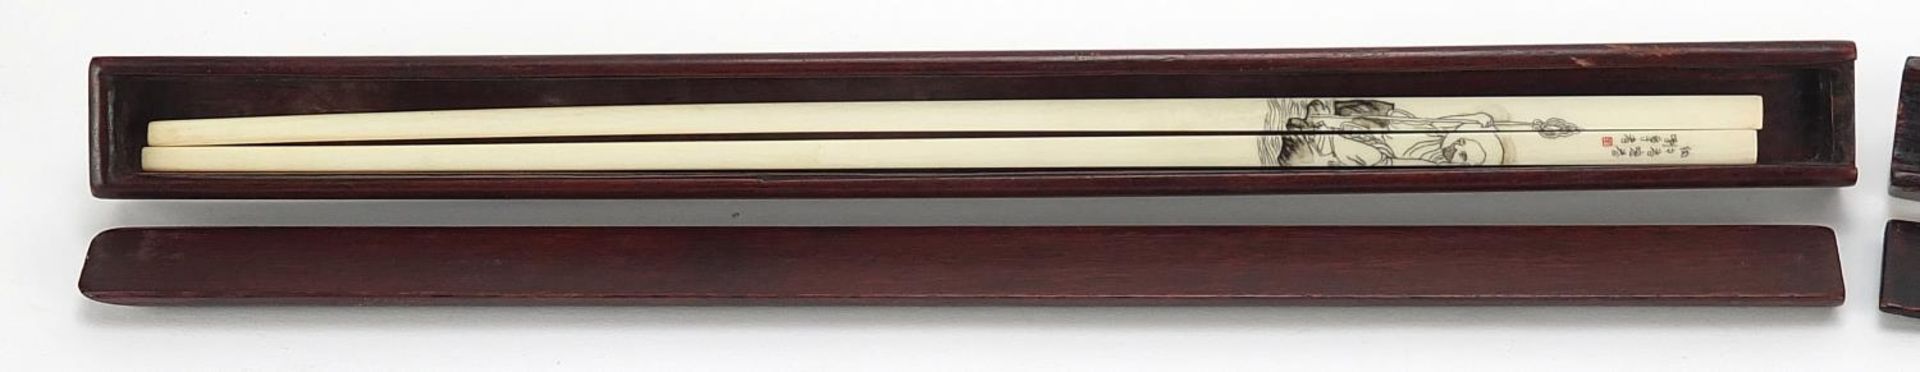 Two pairs of Chinese chop sticks with hardwood cases, the cases 30cm in length - Image 2 of 5